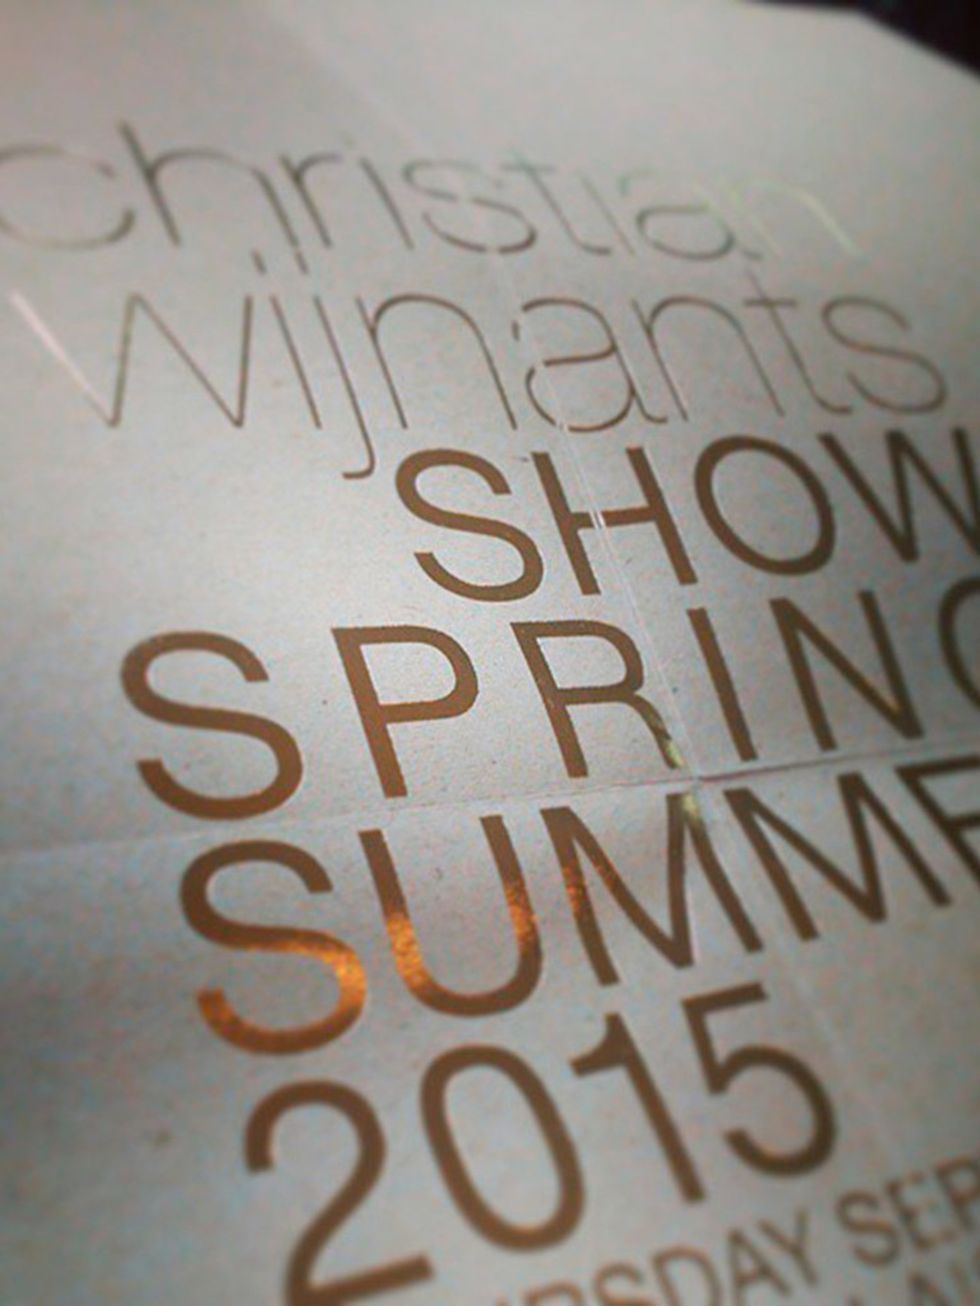 Christian Wijnants
(@christianwijnants)

'Preparation for @christianwijnants #ss15 collection for #parisfashionweek2014 is in progress. We are so excited!'